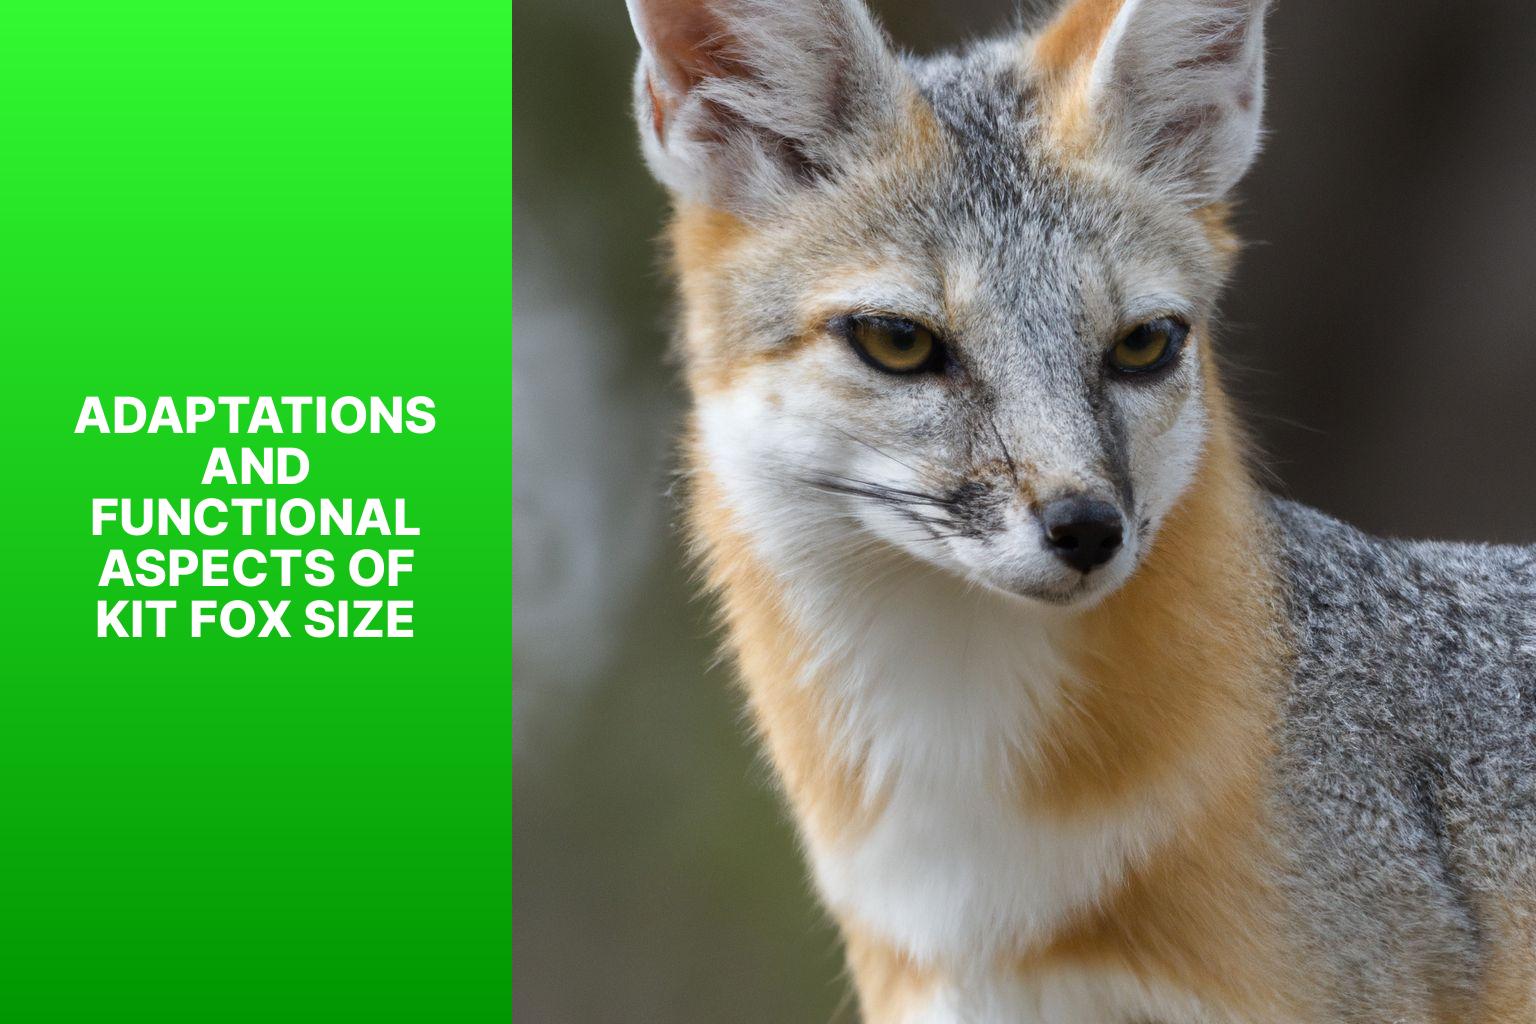 Adaptations and Functional Aspects of Kit Fox Size - Kit Fox Size 